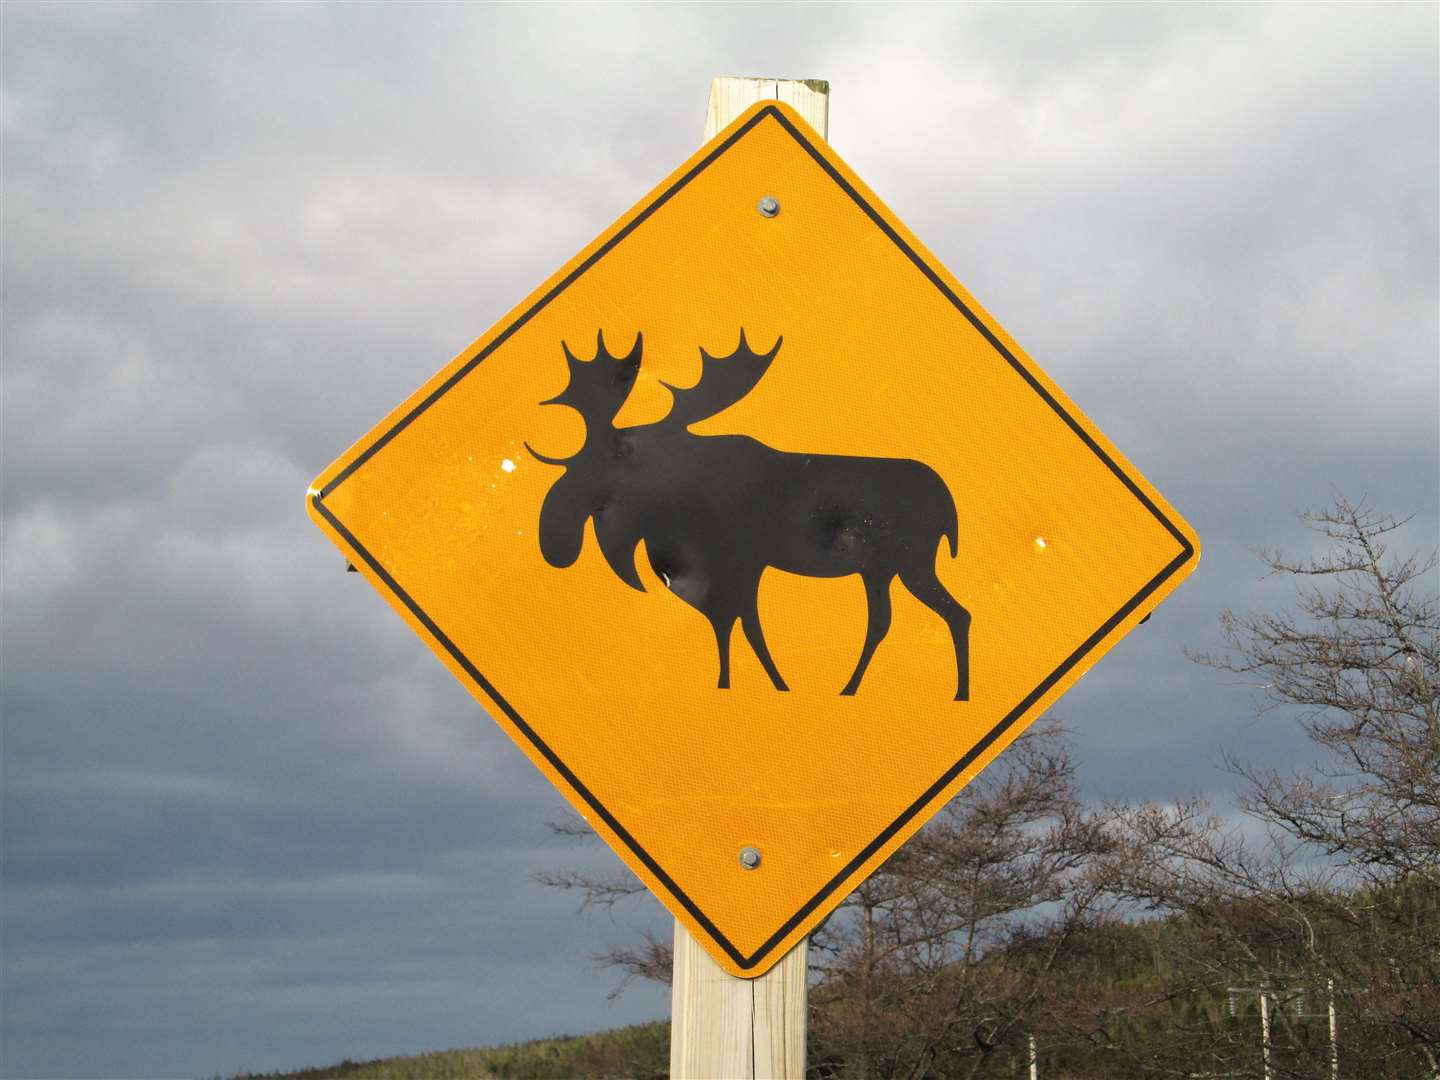 Watch out for low-flying moose in this area.